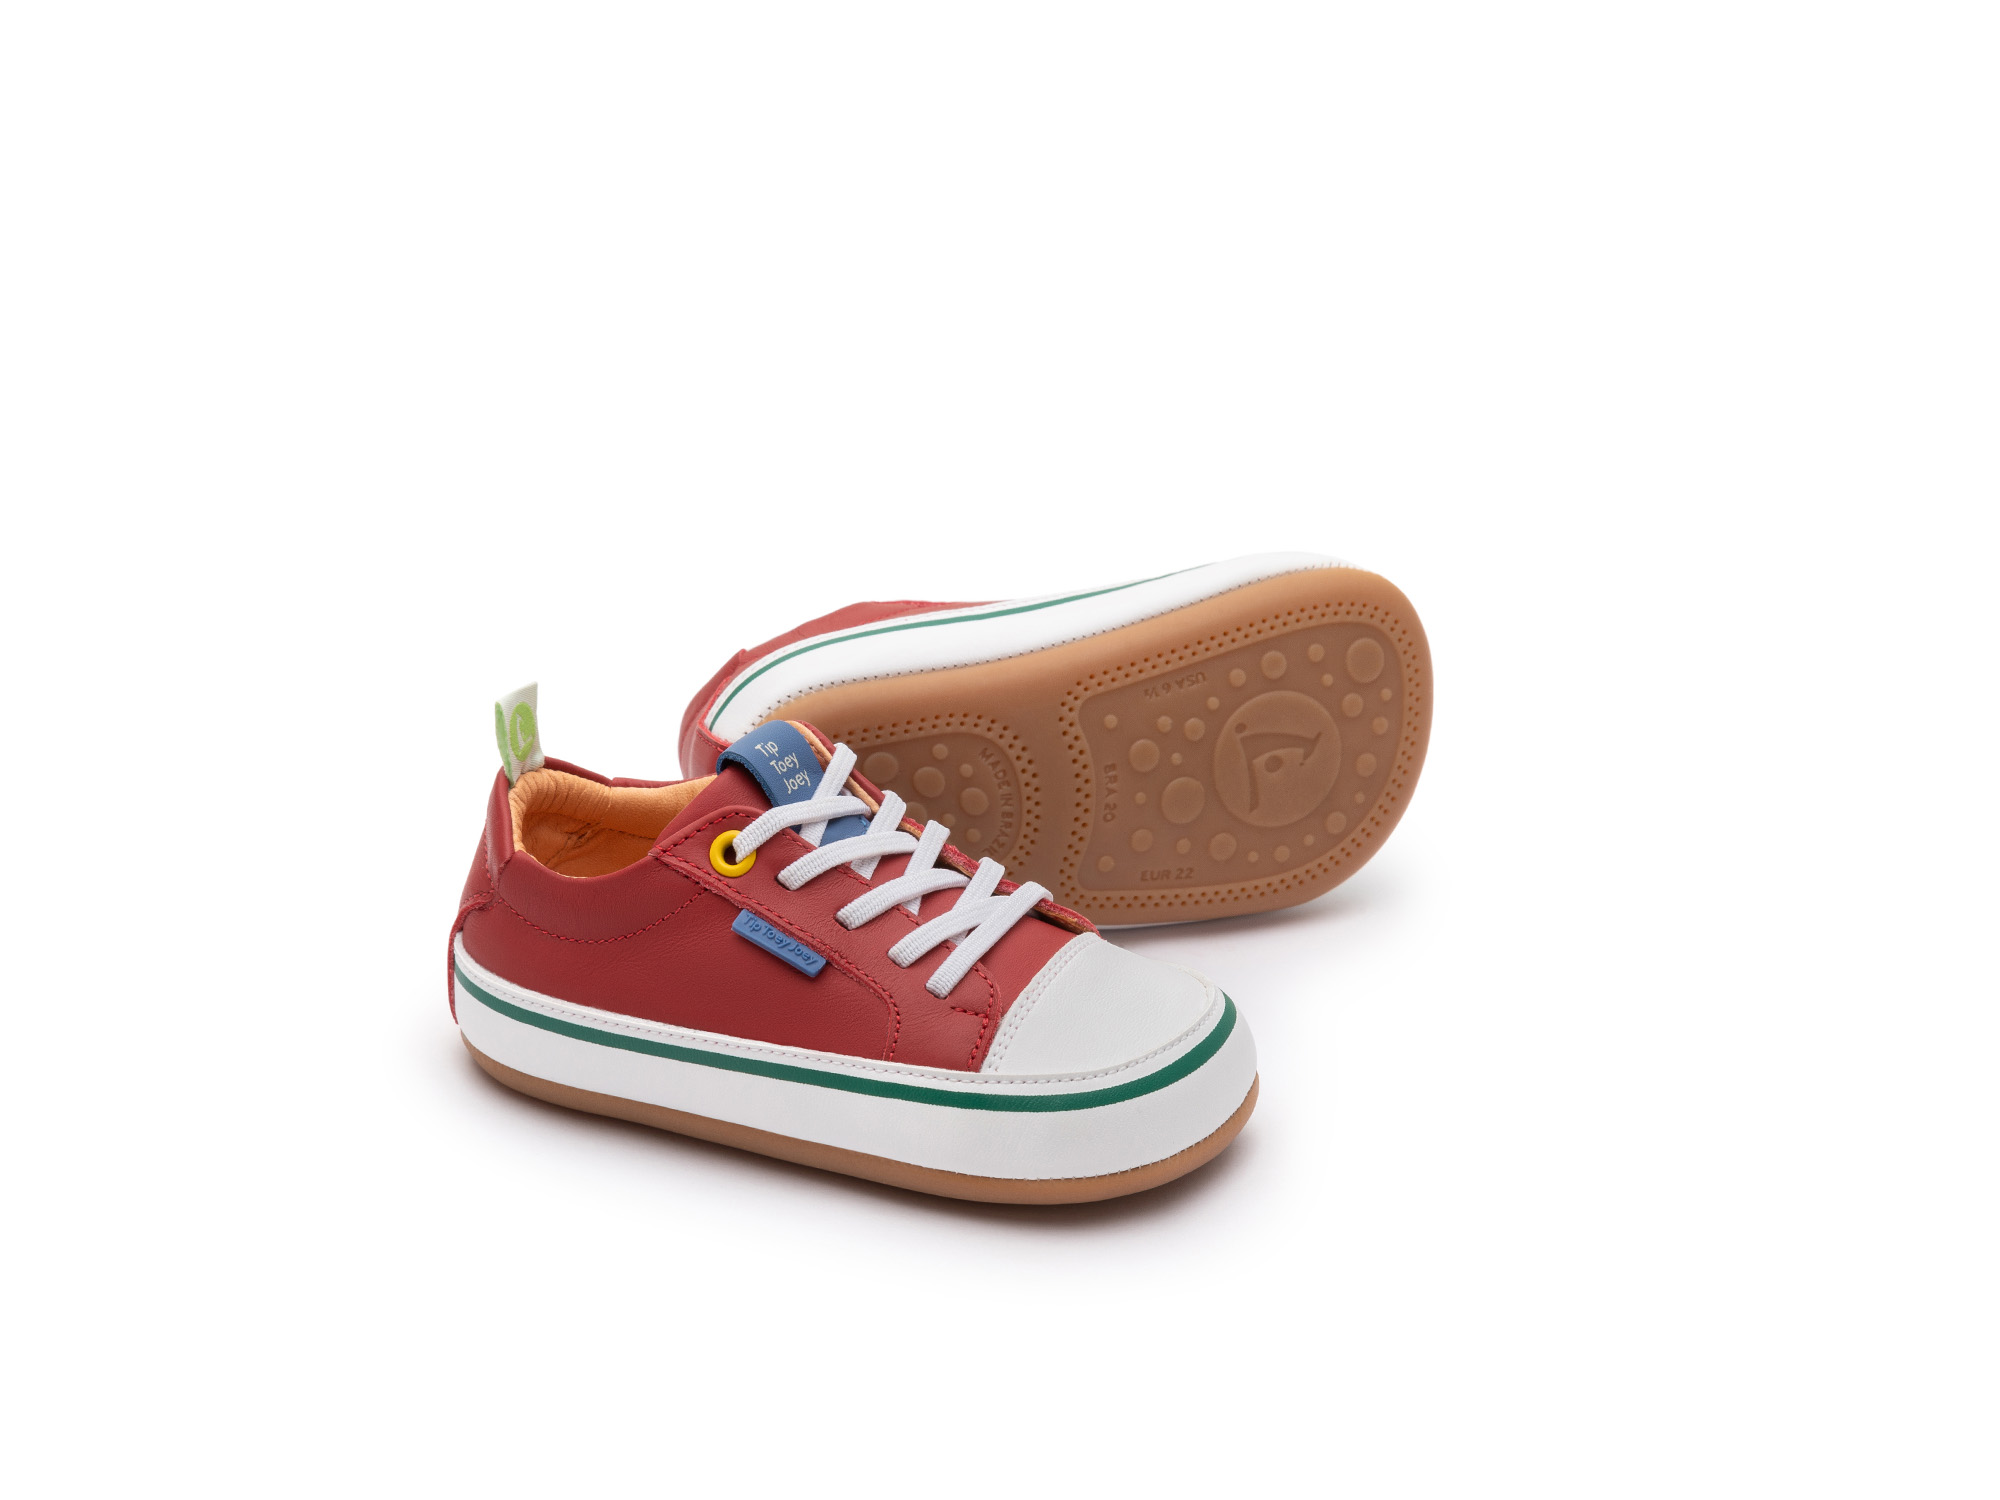 UP & GO Sneakers for Unissex Funky Colors | Tip Toey Joey - Australia - 0